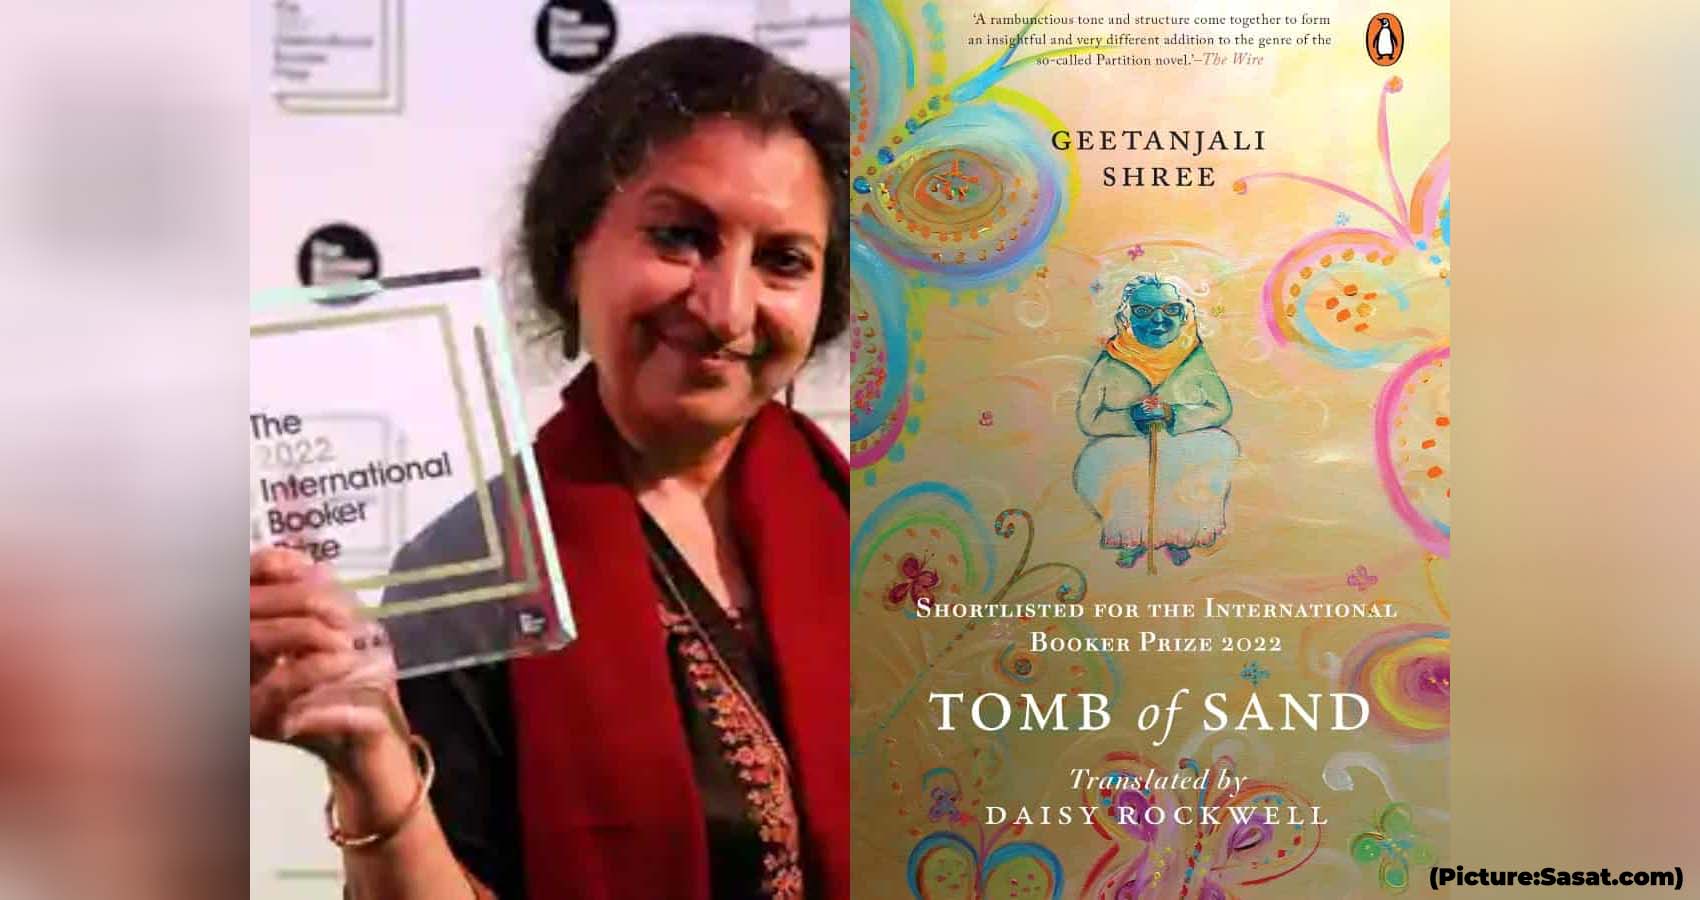 Geetanjali Shree’s “Tomb Of Sand” Becomes First Novel Translated From Hindi To Win International Booker Prize